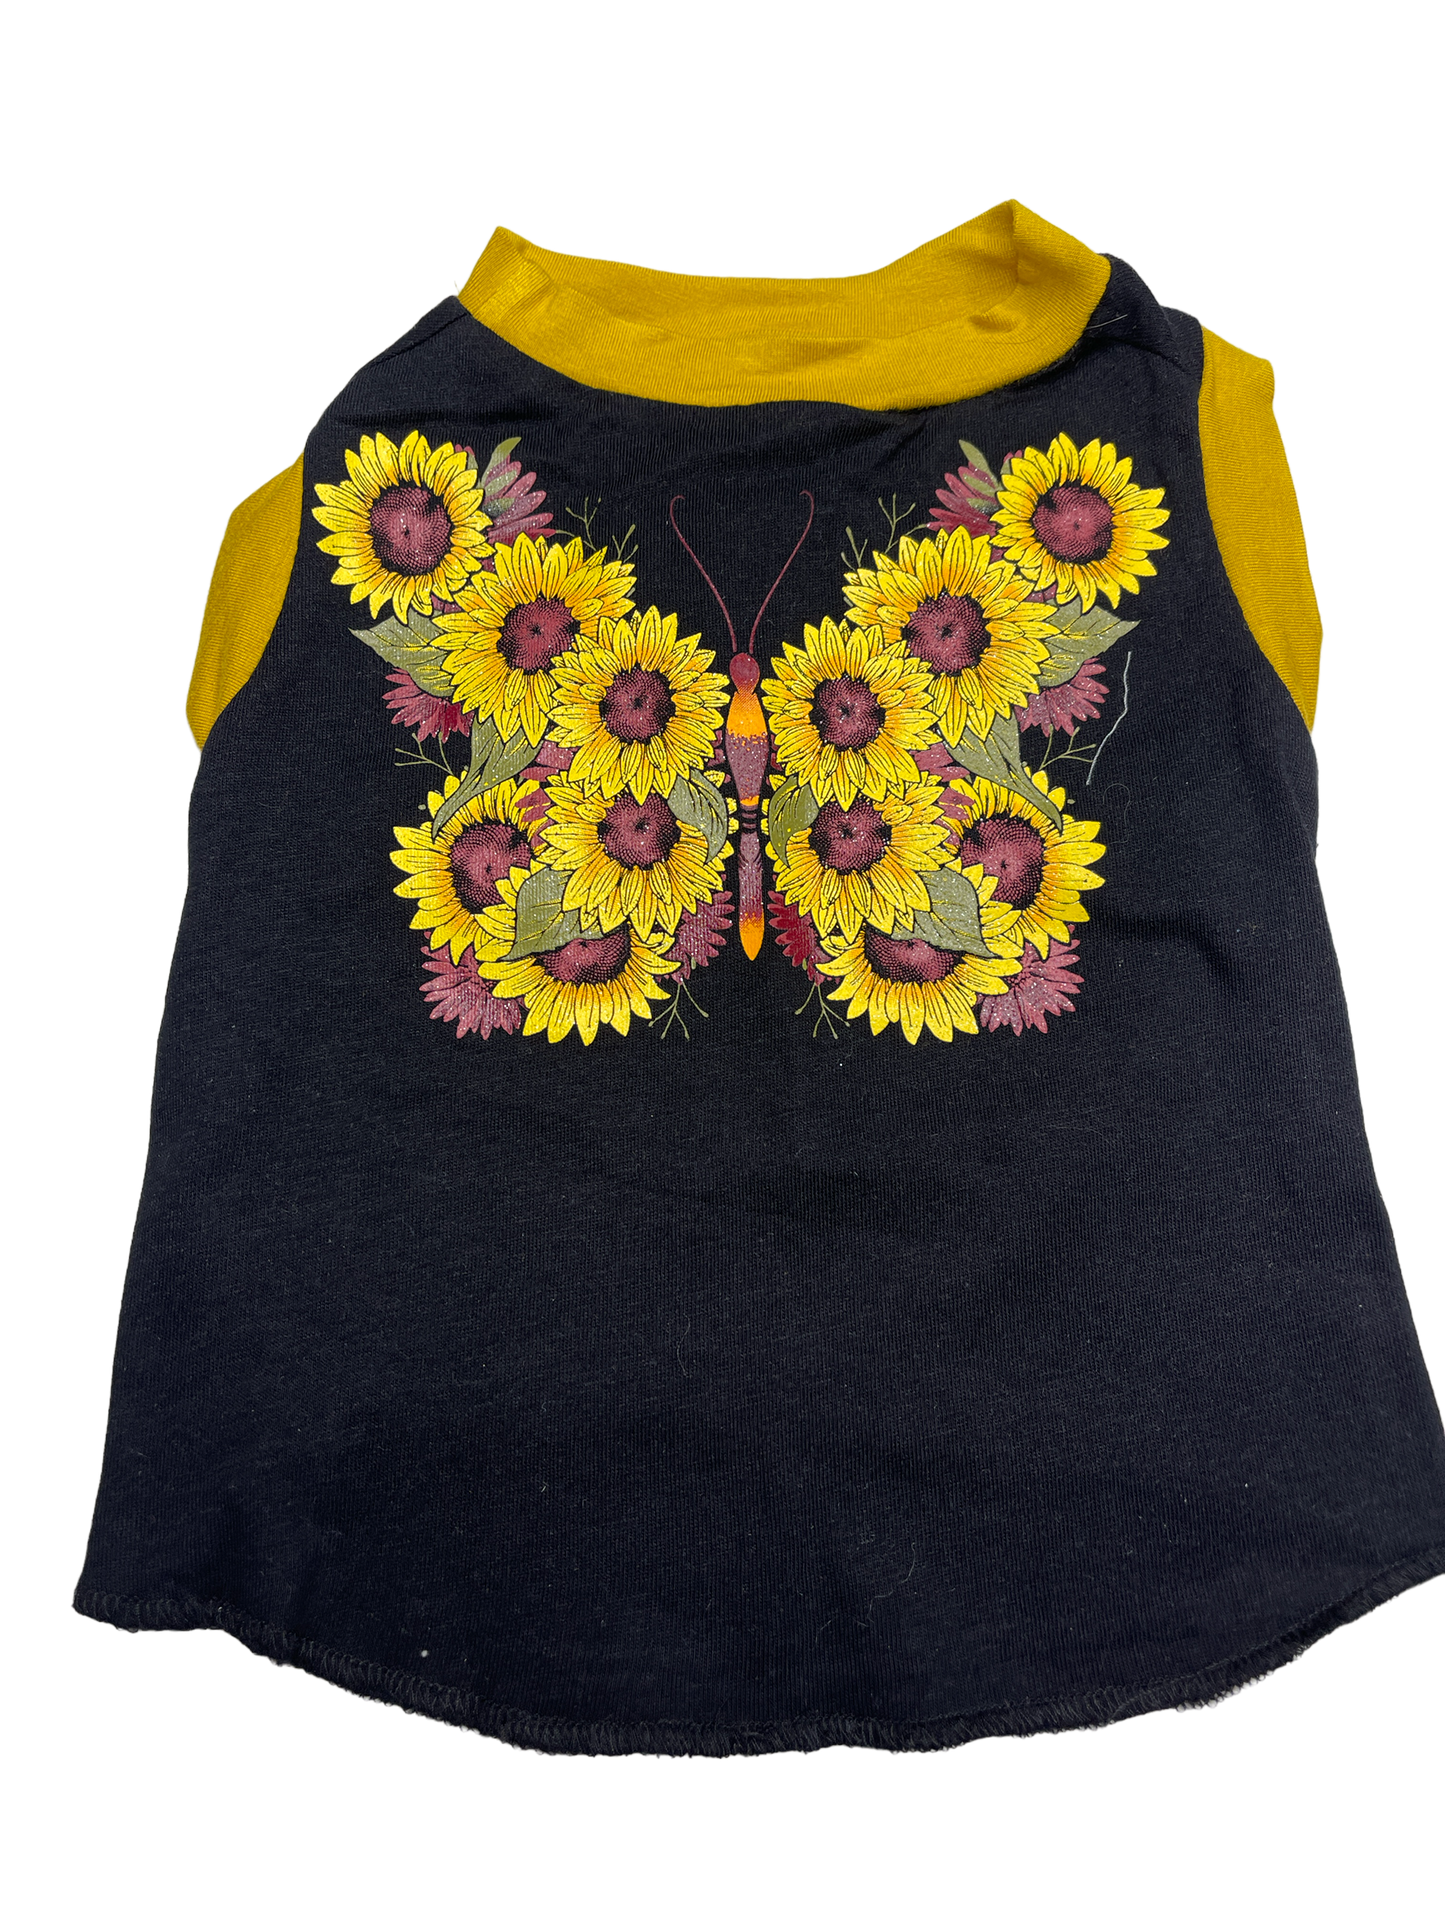 Upcycled Dog Tank - M "Sunflower Wings"